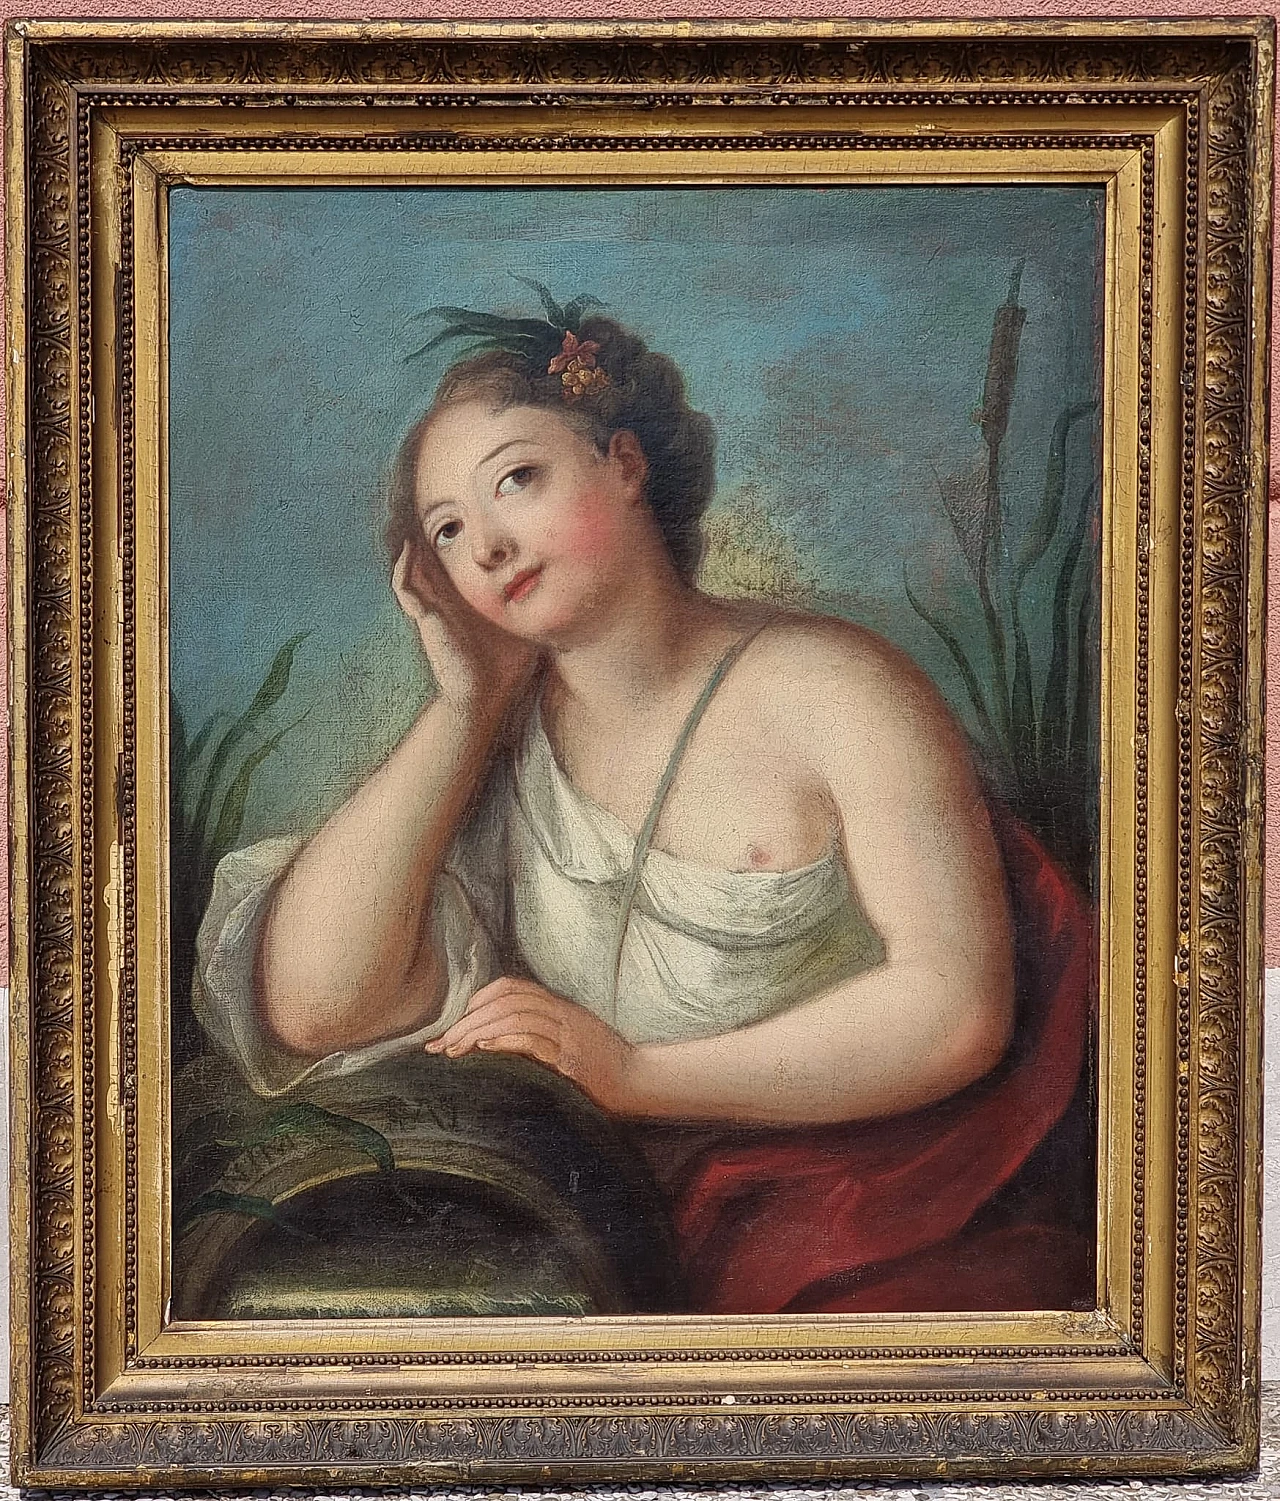 Water nymph, oil painting on canvas, 18th century 1